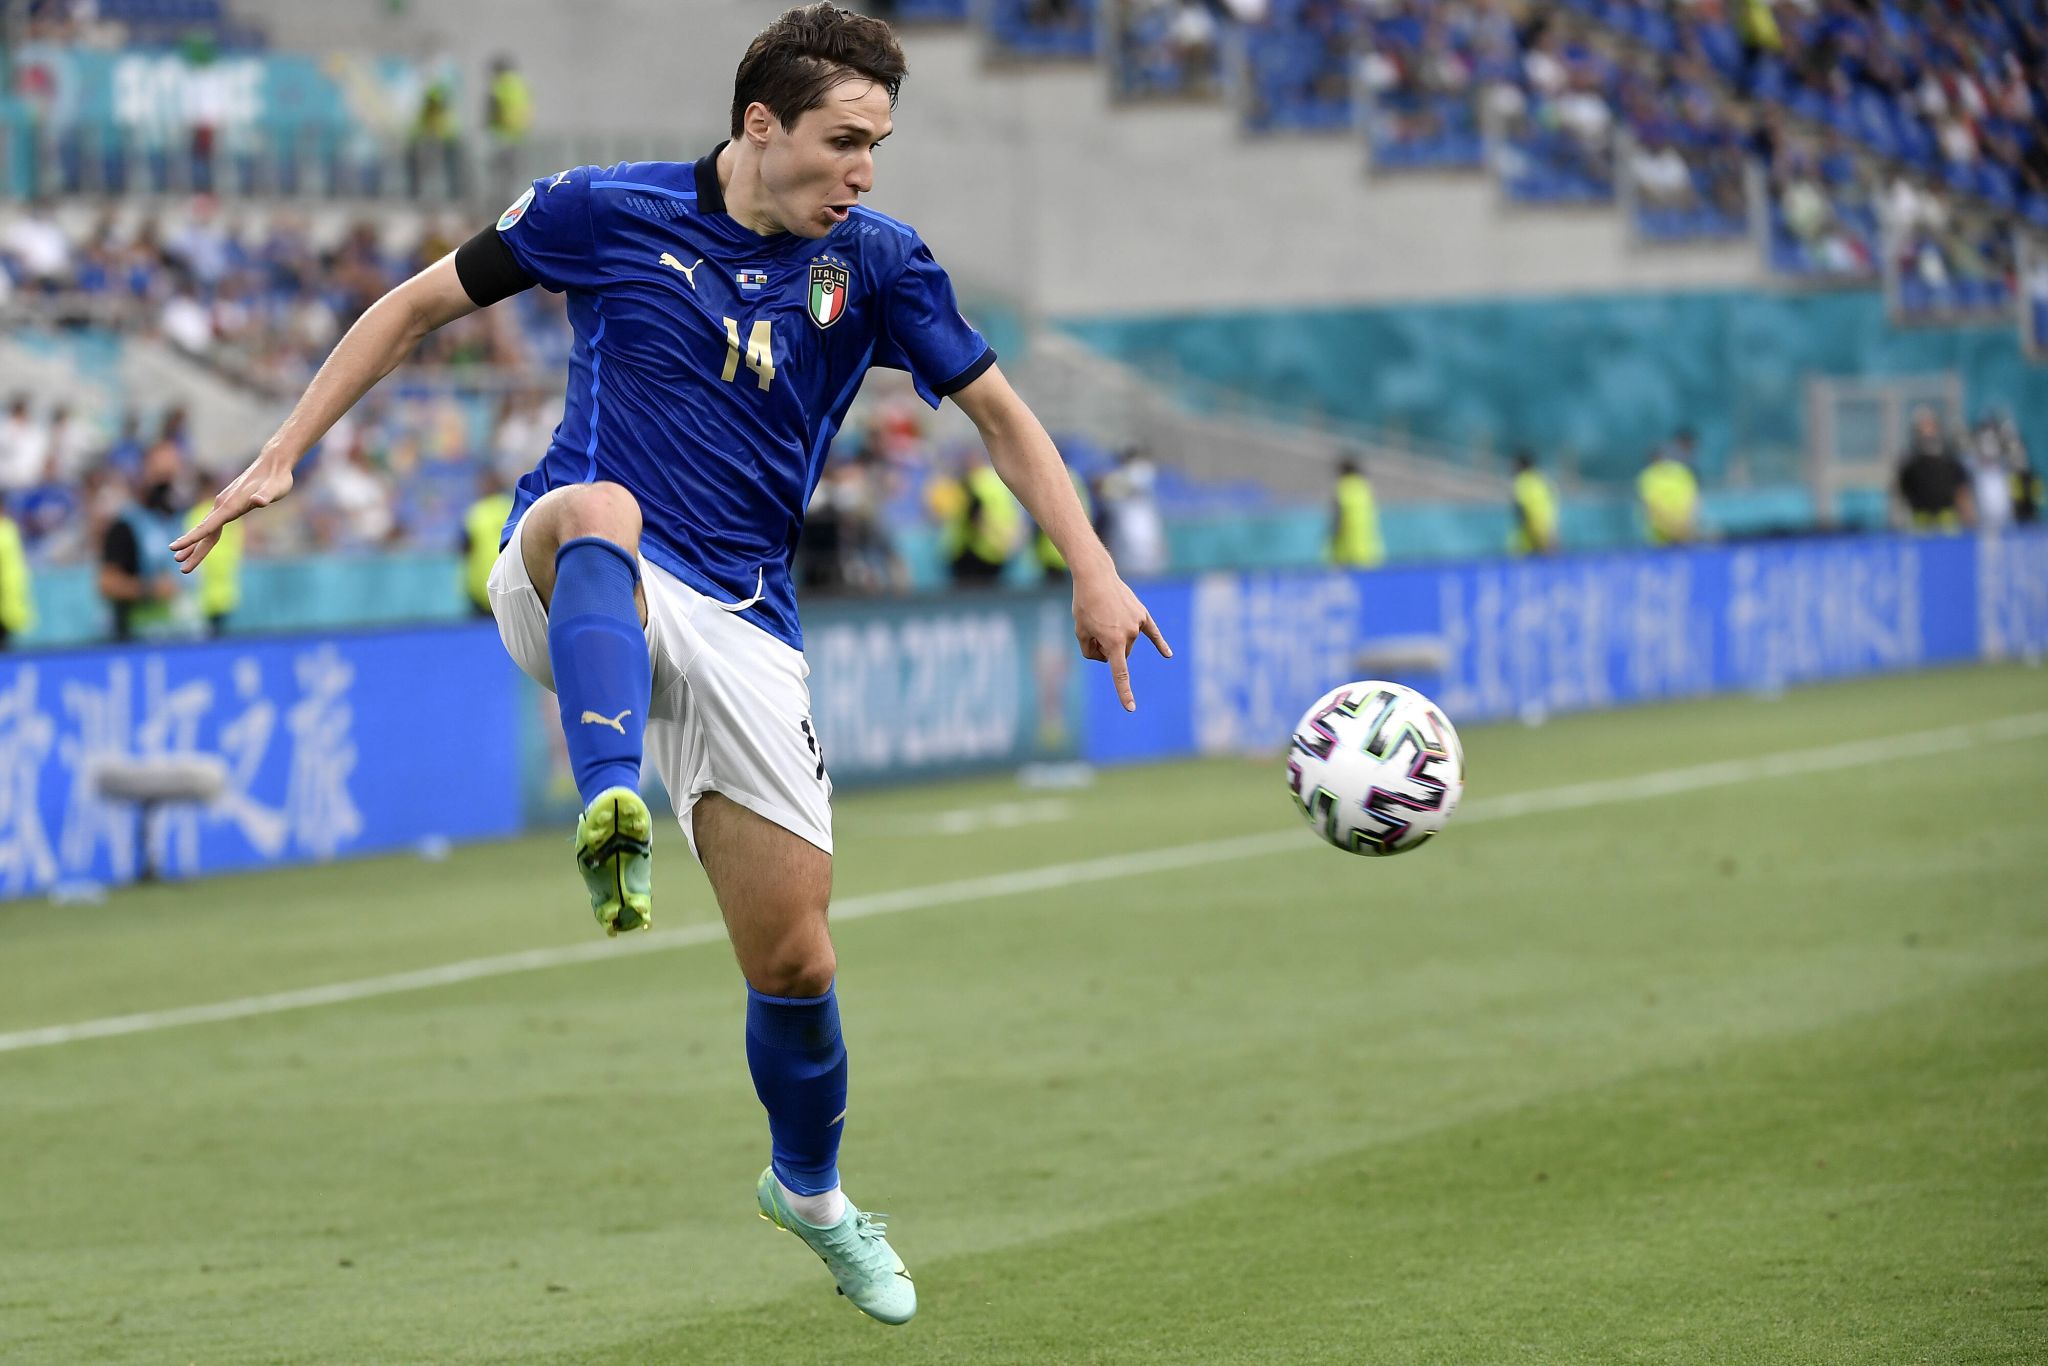 Video: Juventus Forward Federico Chiesa Opens up the Scoring for Italy